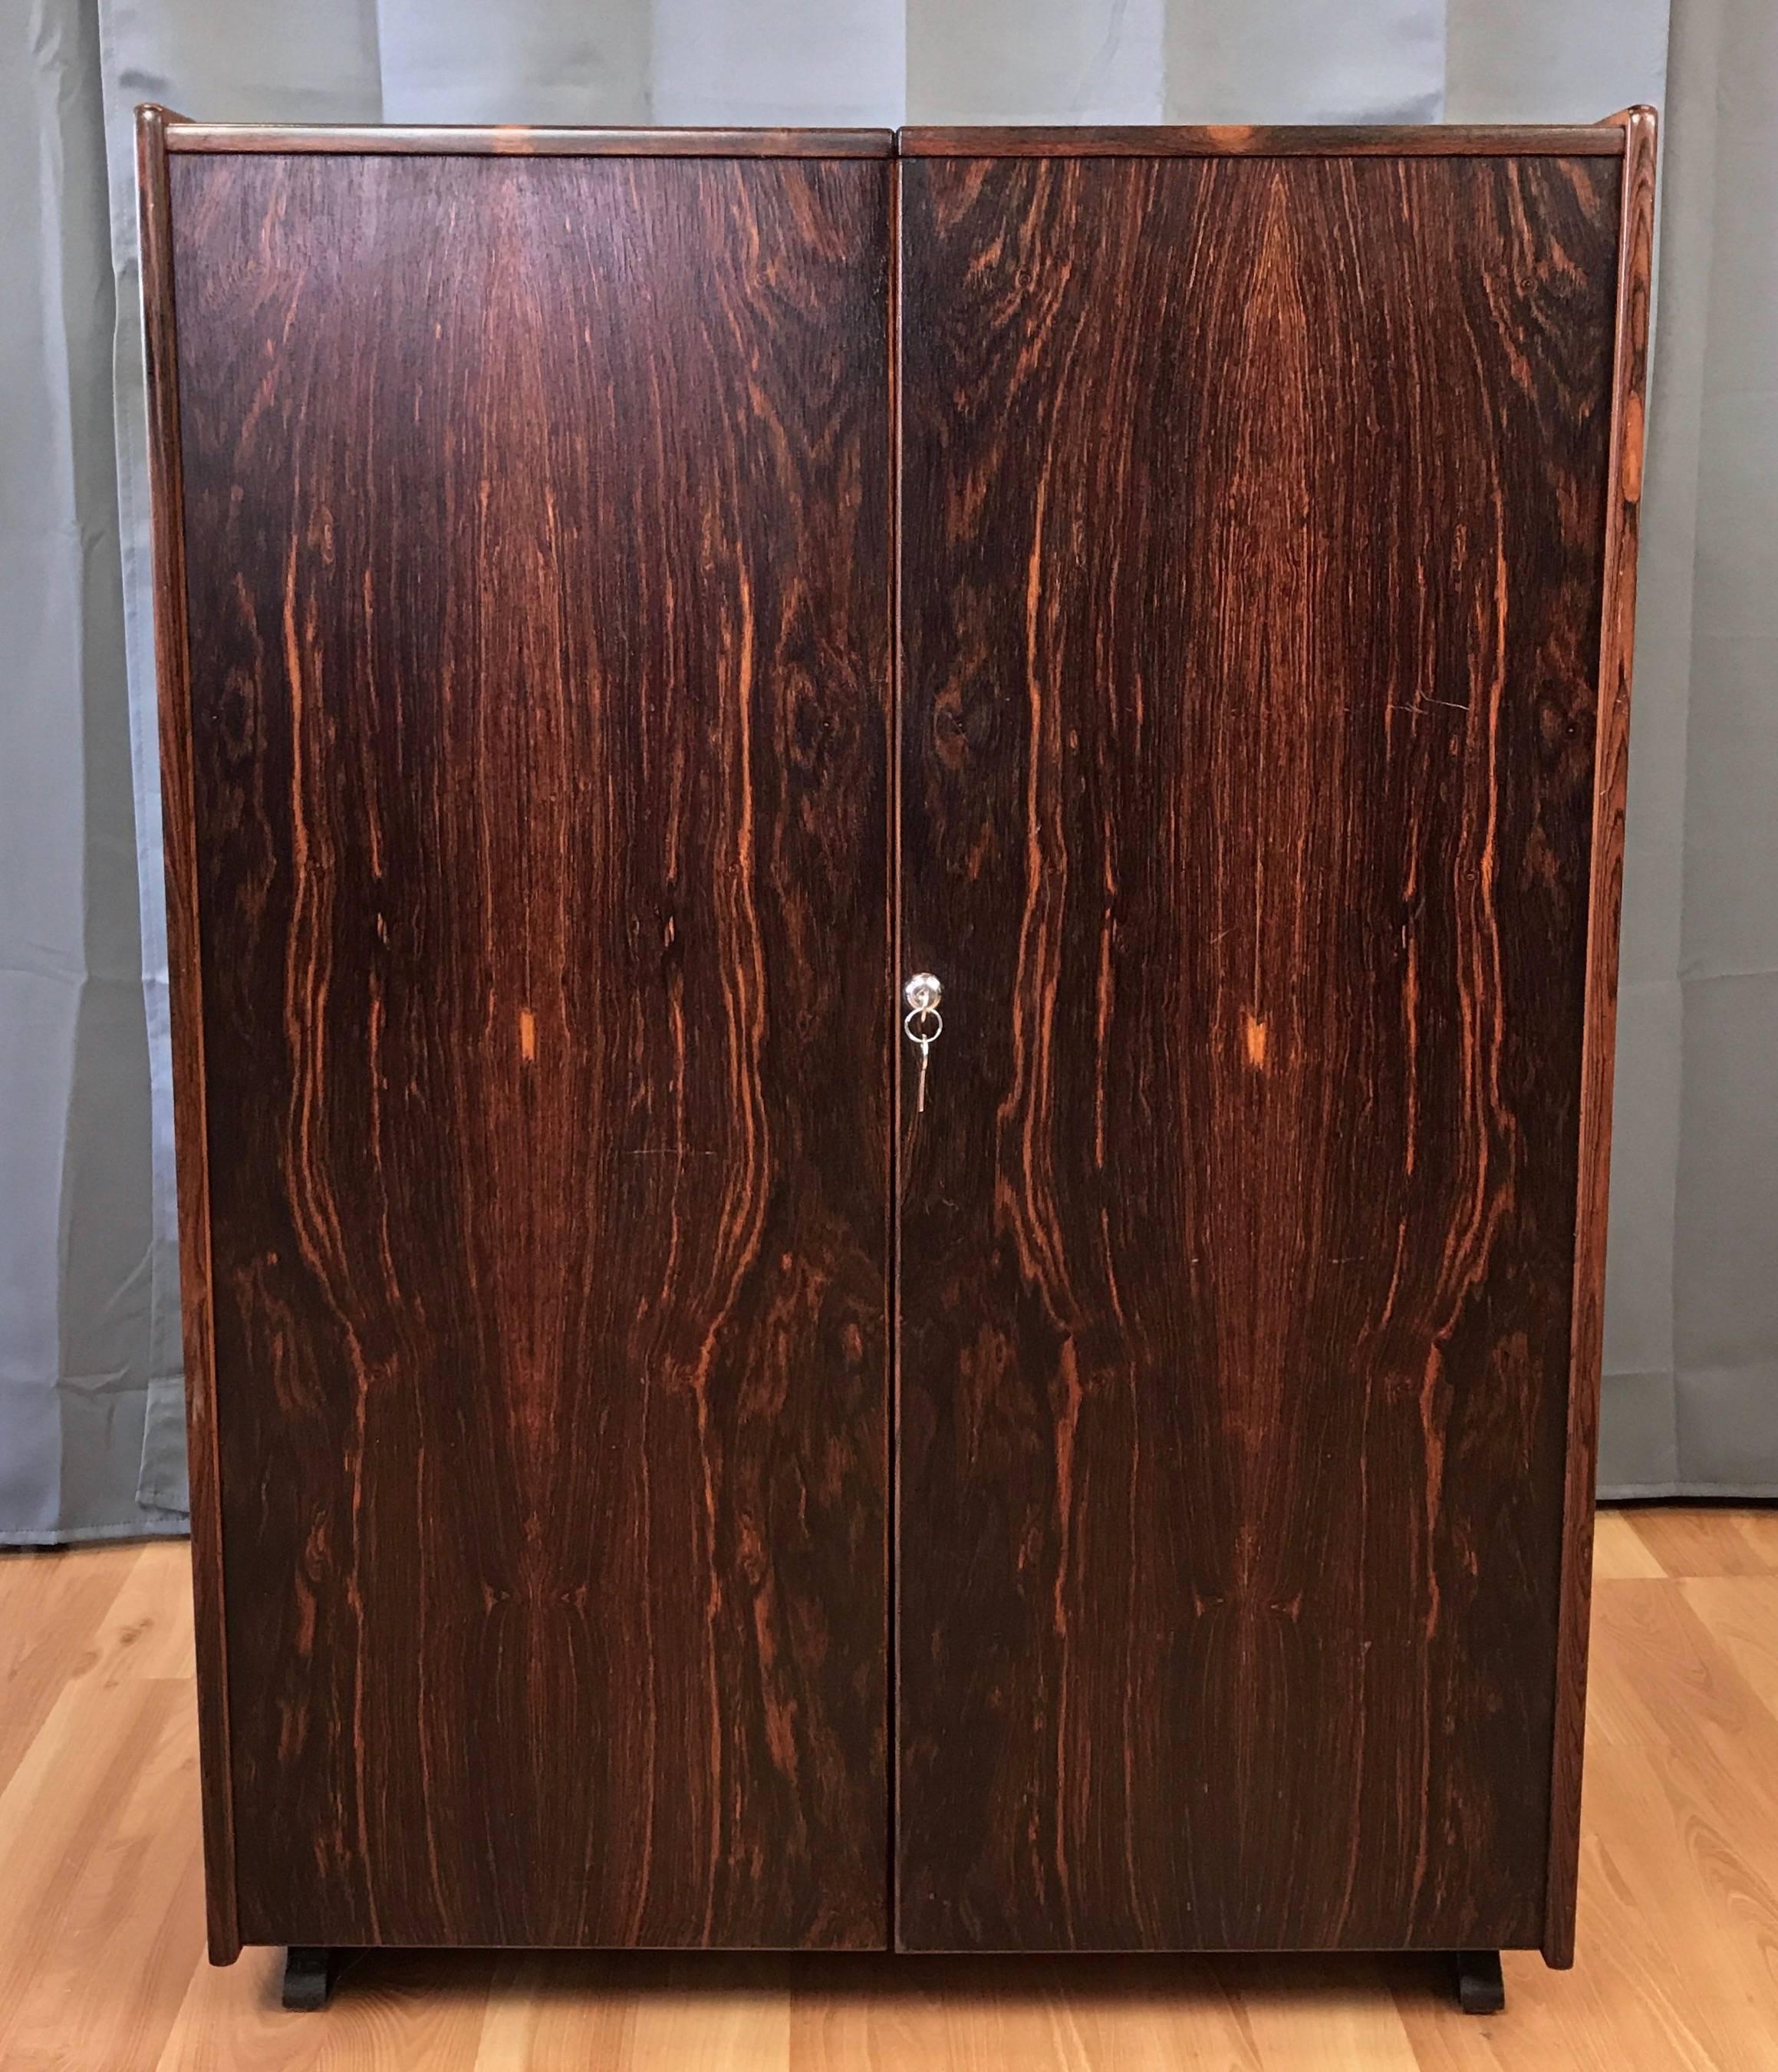 An extraordinary Danish modern “Magic Box” rosewood hide-away desk by Mummenthaler & Meier.

Designed in 1928, this circa 1970s Wooton-style desk cleverly conceals an on-demand office within an armoire-like cabinet. Exterior finished in strikingly